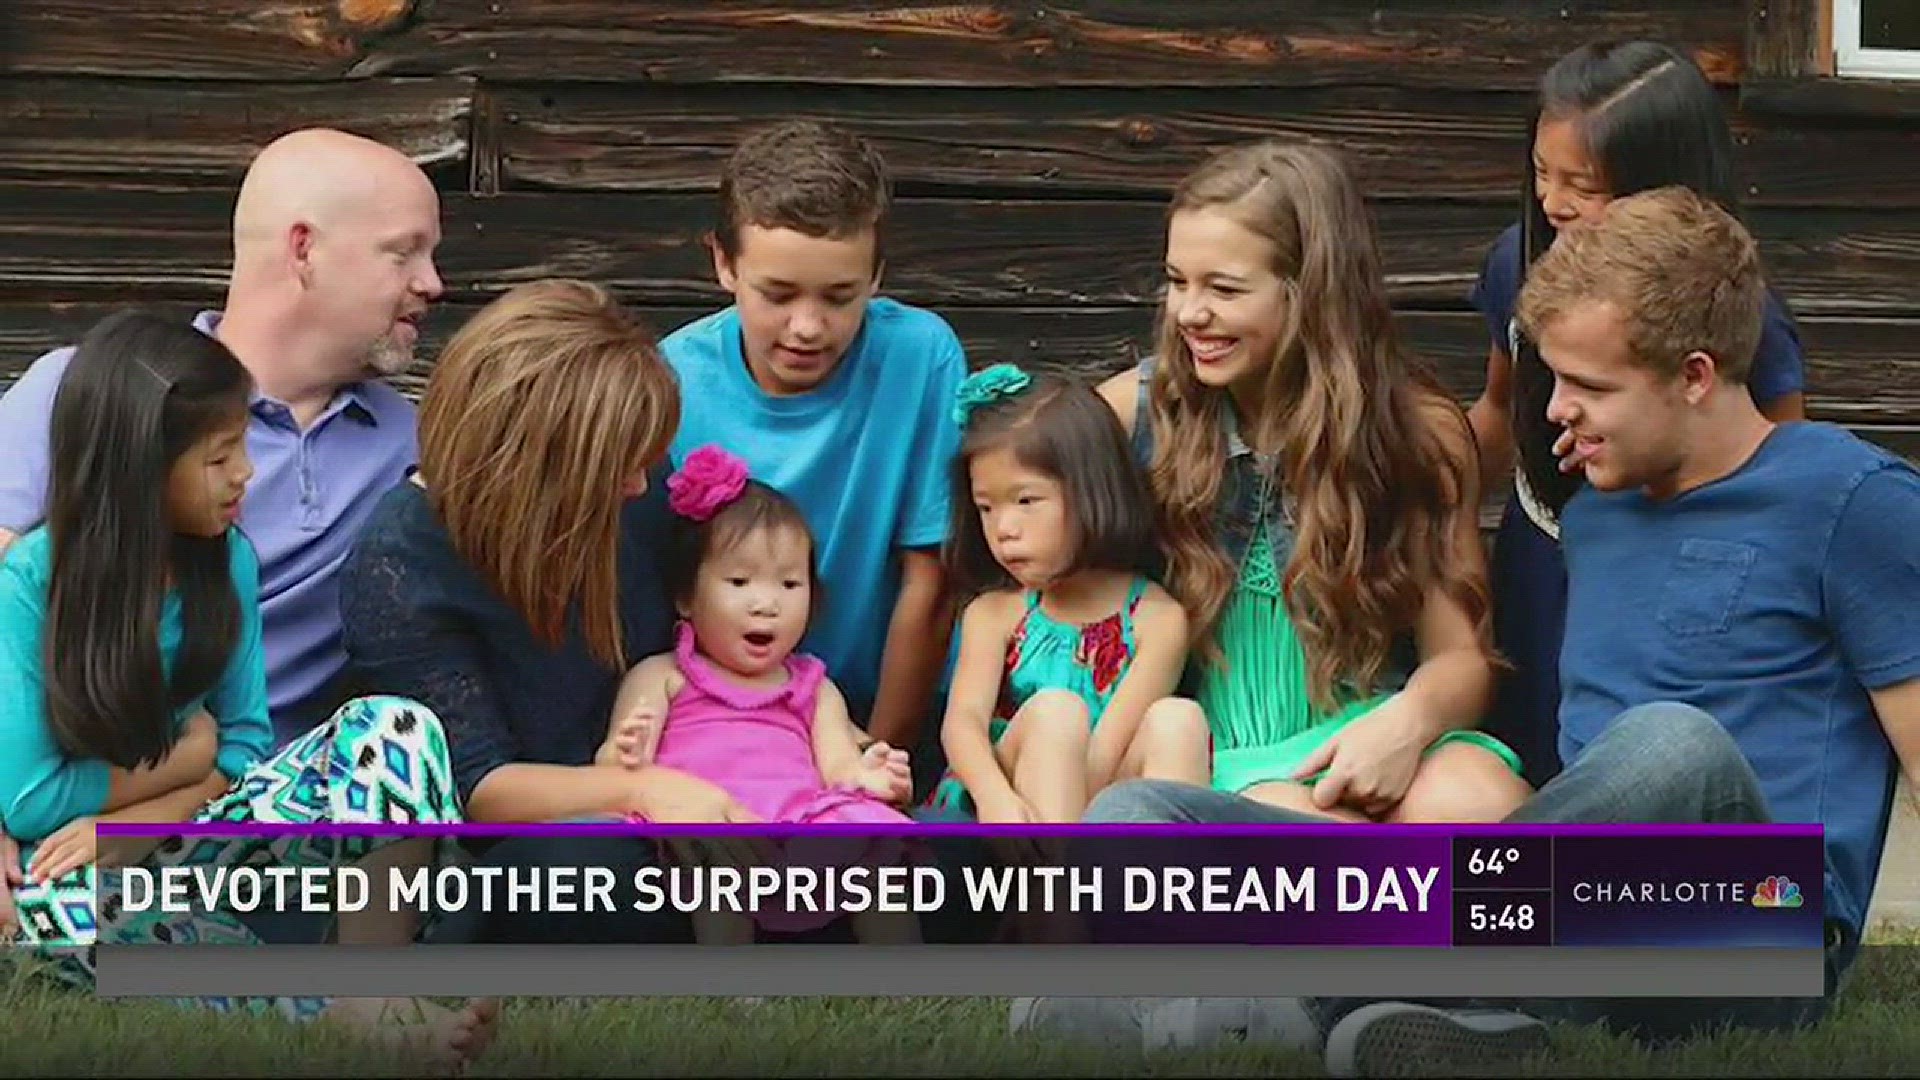 Jennifer Barbee and her husband adopted four special needs children from China, adding to the three they already have.